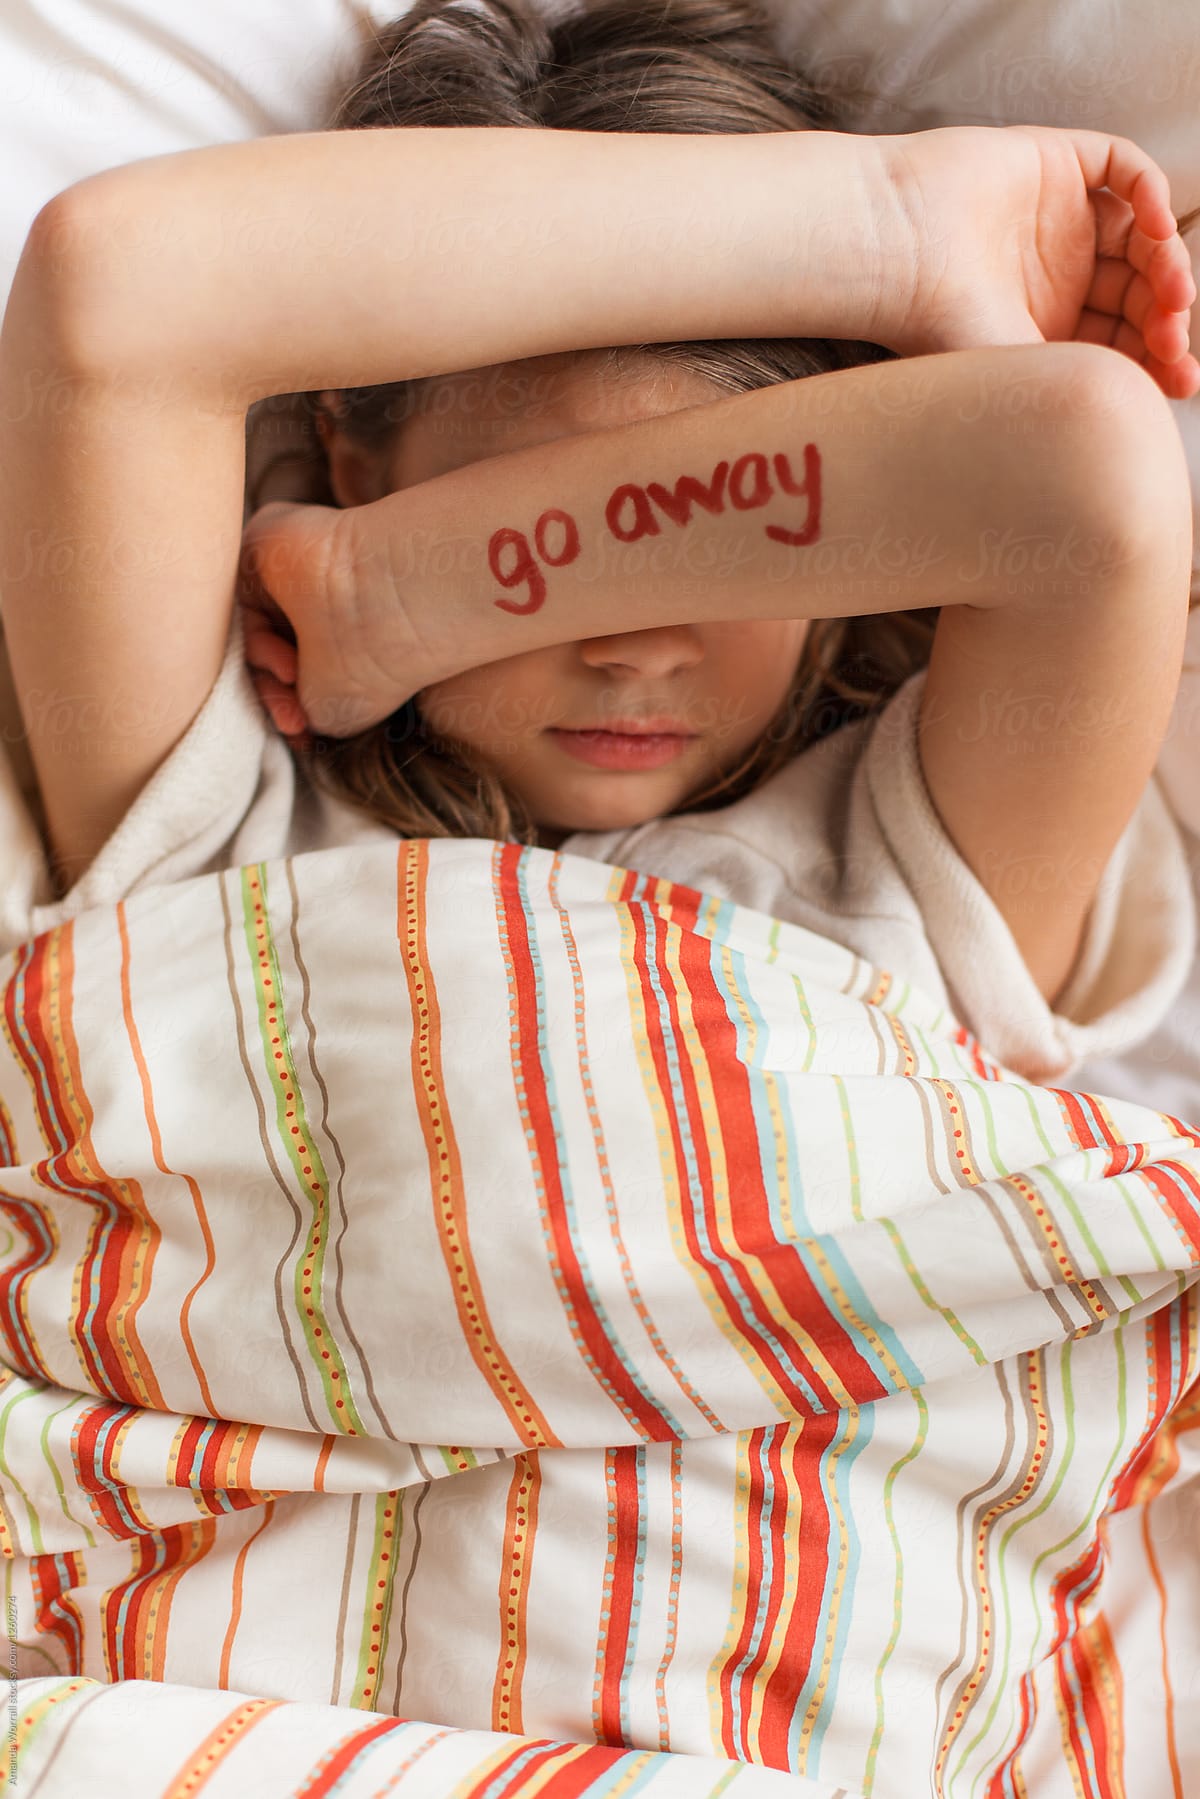 Grumpy Tween Girl Laying In Bed With The Words By Stocksy Contributor Amanda Worrall Stocksy 8707